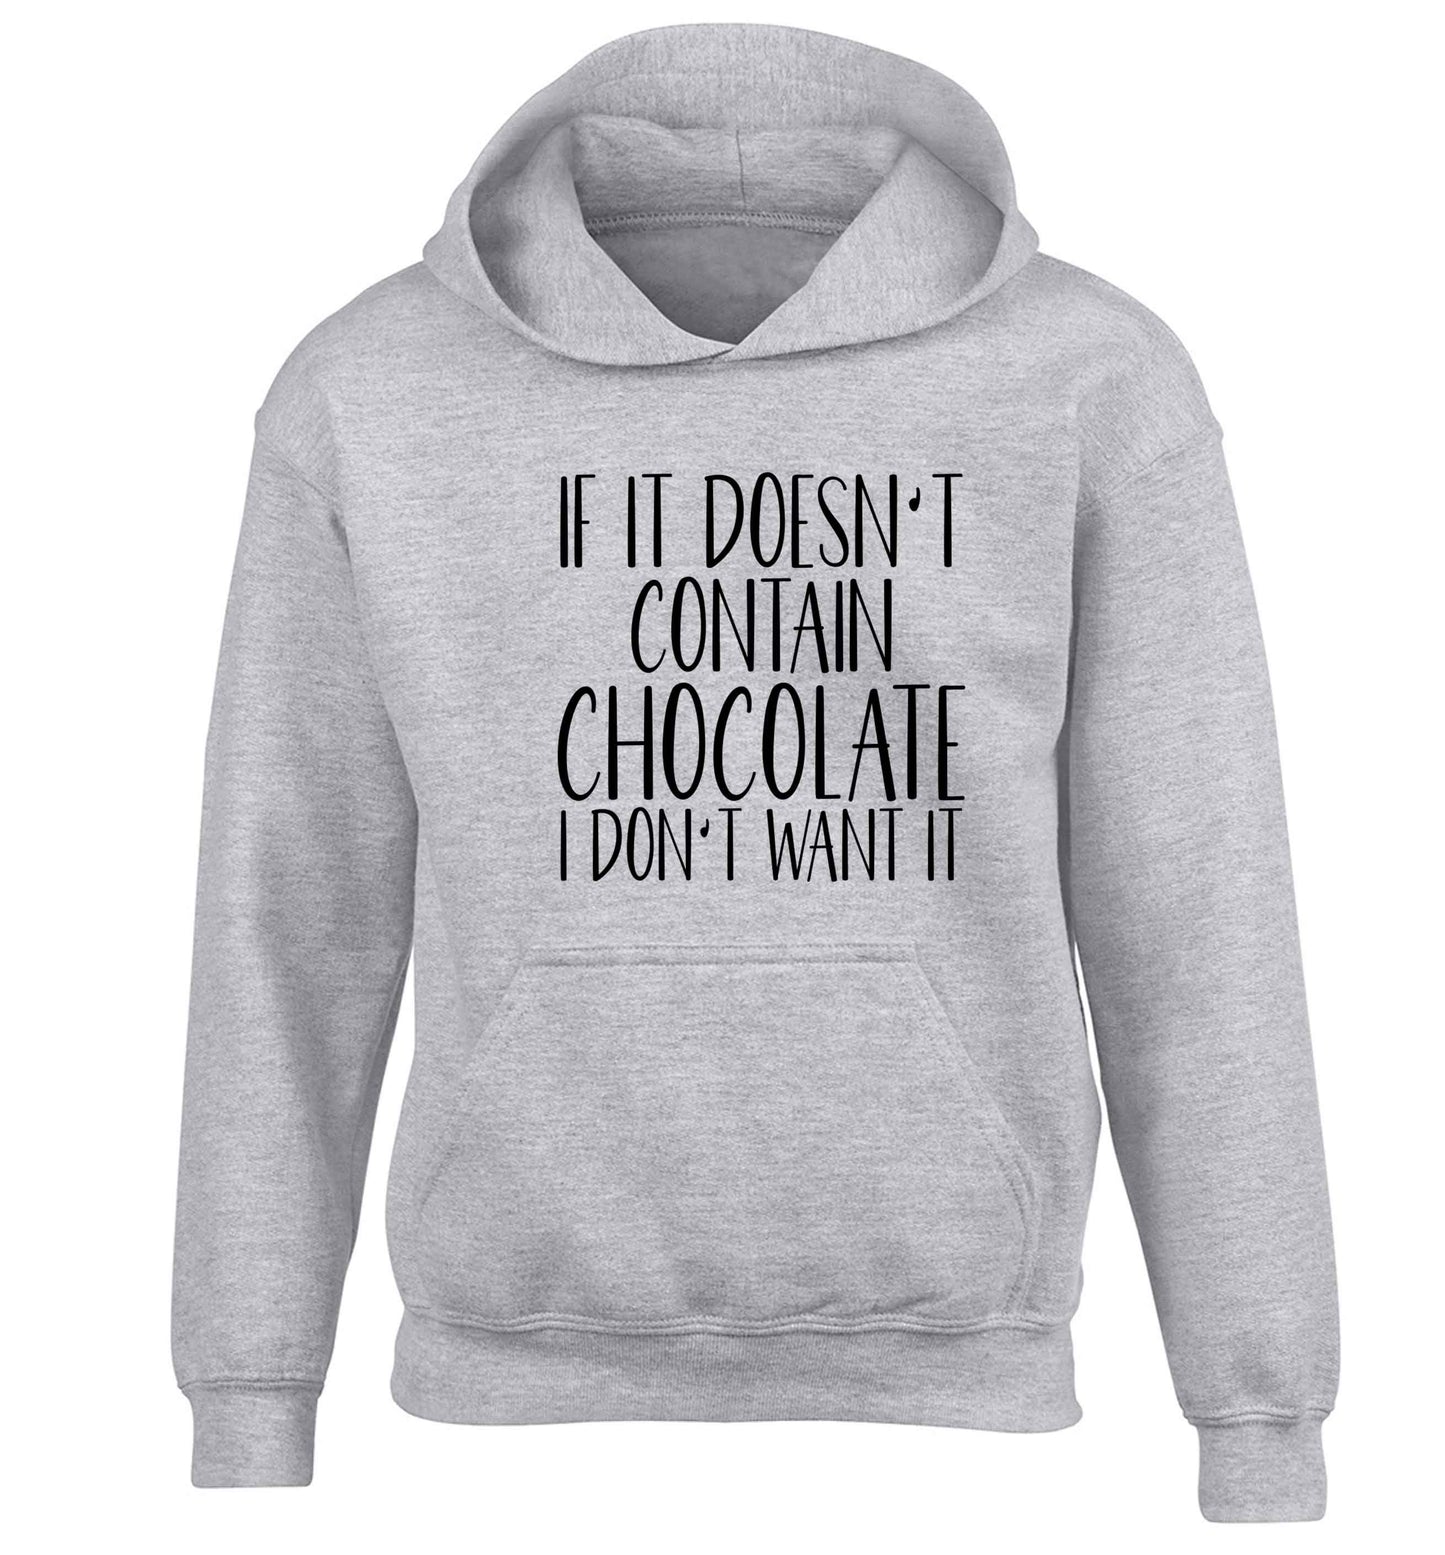 If it doesn't contain chocolate I don't want it children's grey hoodie 12-13 Years